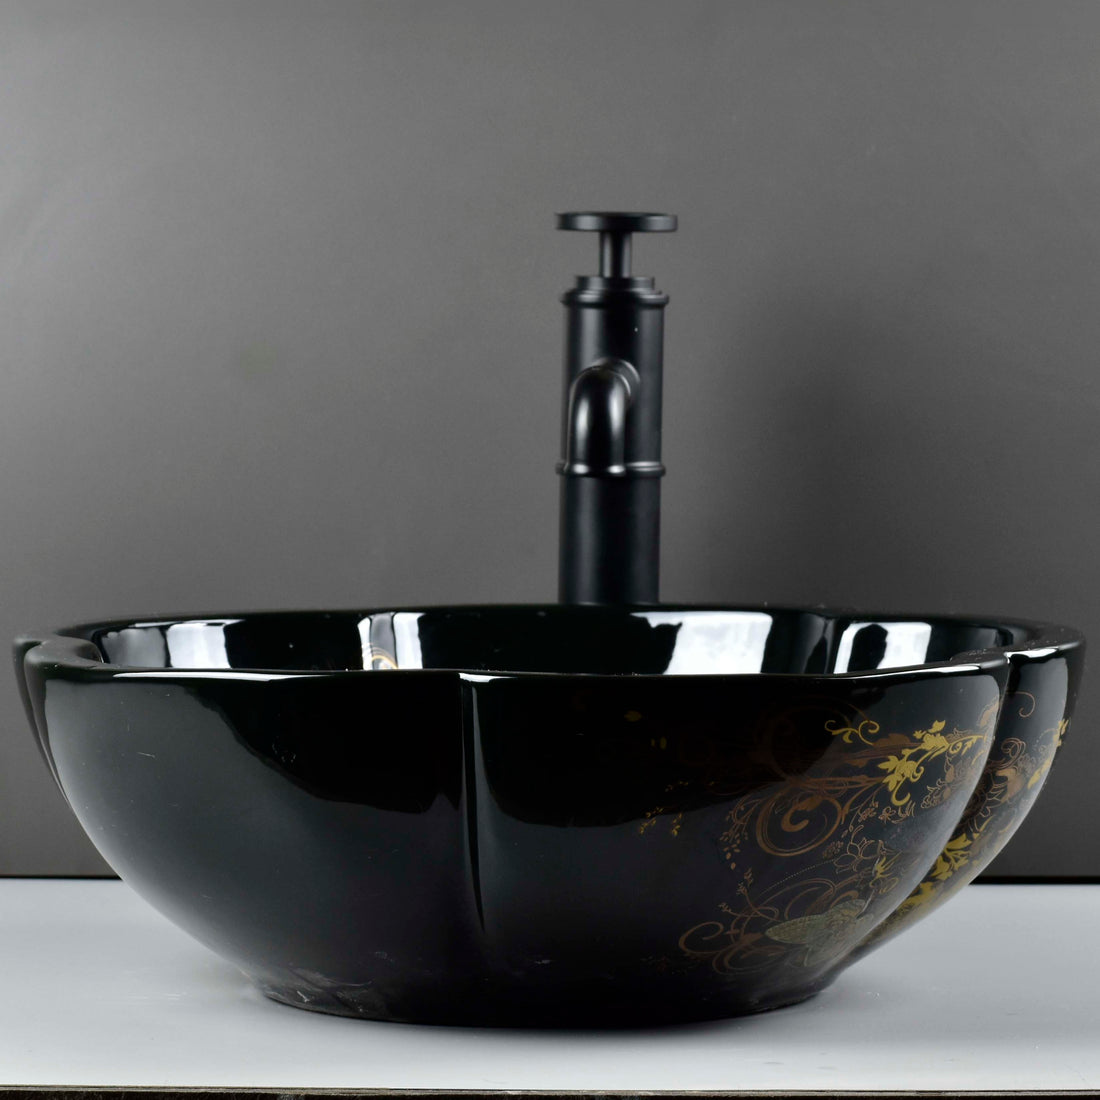 InArt Ceramic Oval Wash Basin | European Style | TableTop Vessel Sink | Luxurious Over Counter Design | 41x41x14 CM | Mexican - InArt-Studio